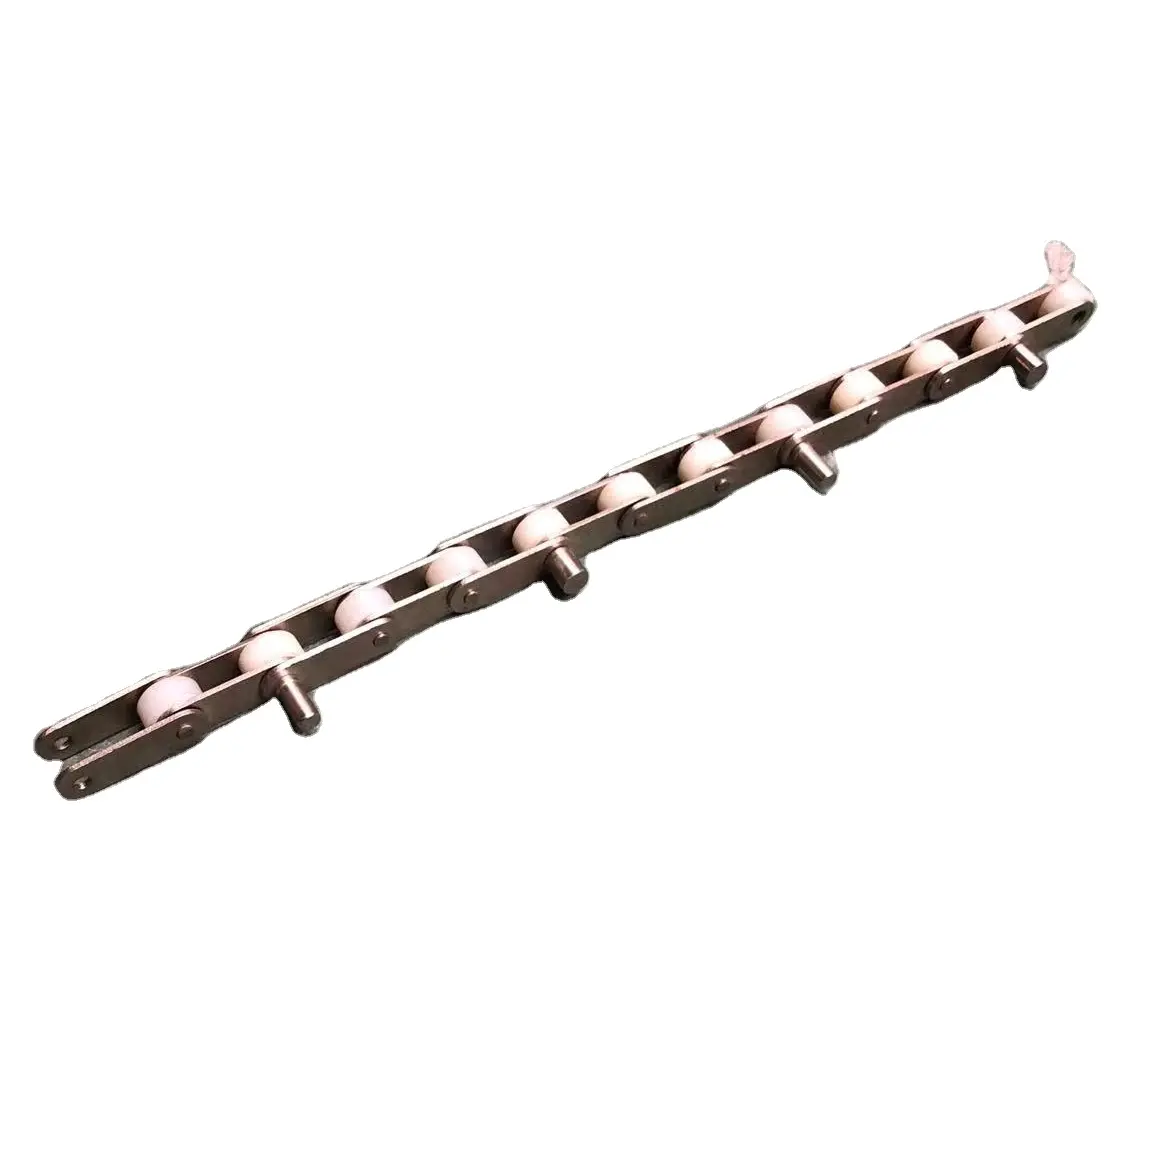 Chain 304 Bl 4018 3.8L Bucket Roller Chain Bucket Elevator Chain 304 Stainless Steel Or Carbon Steel